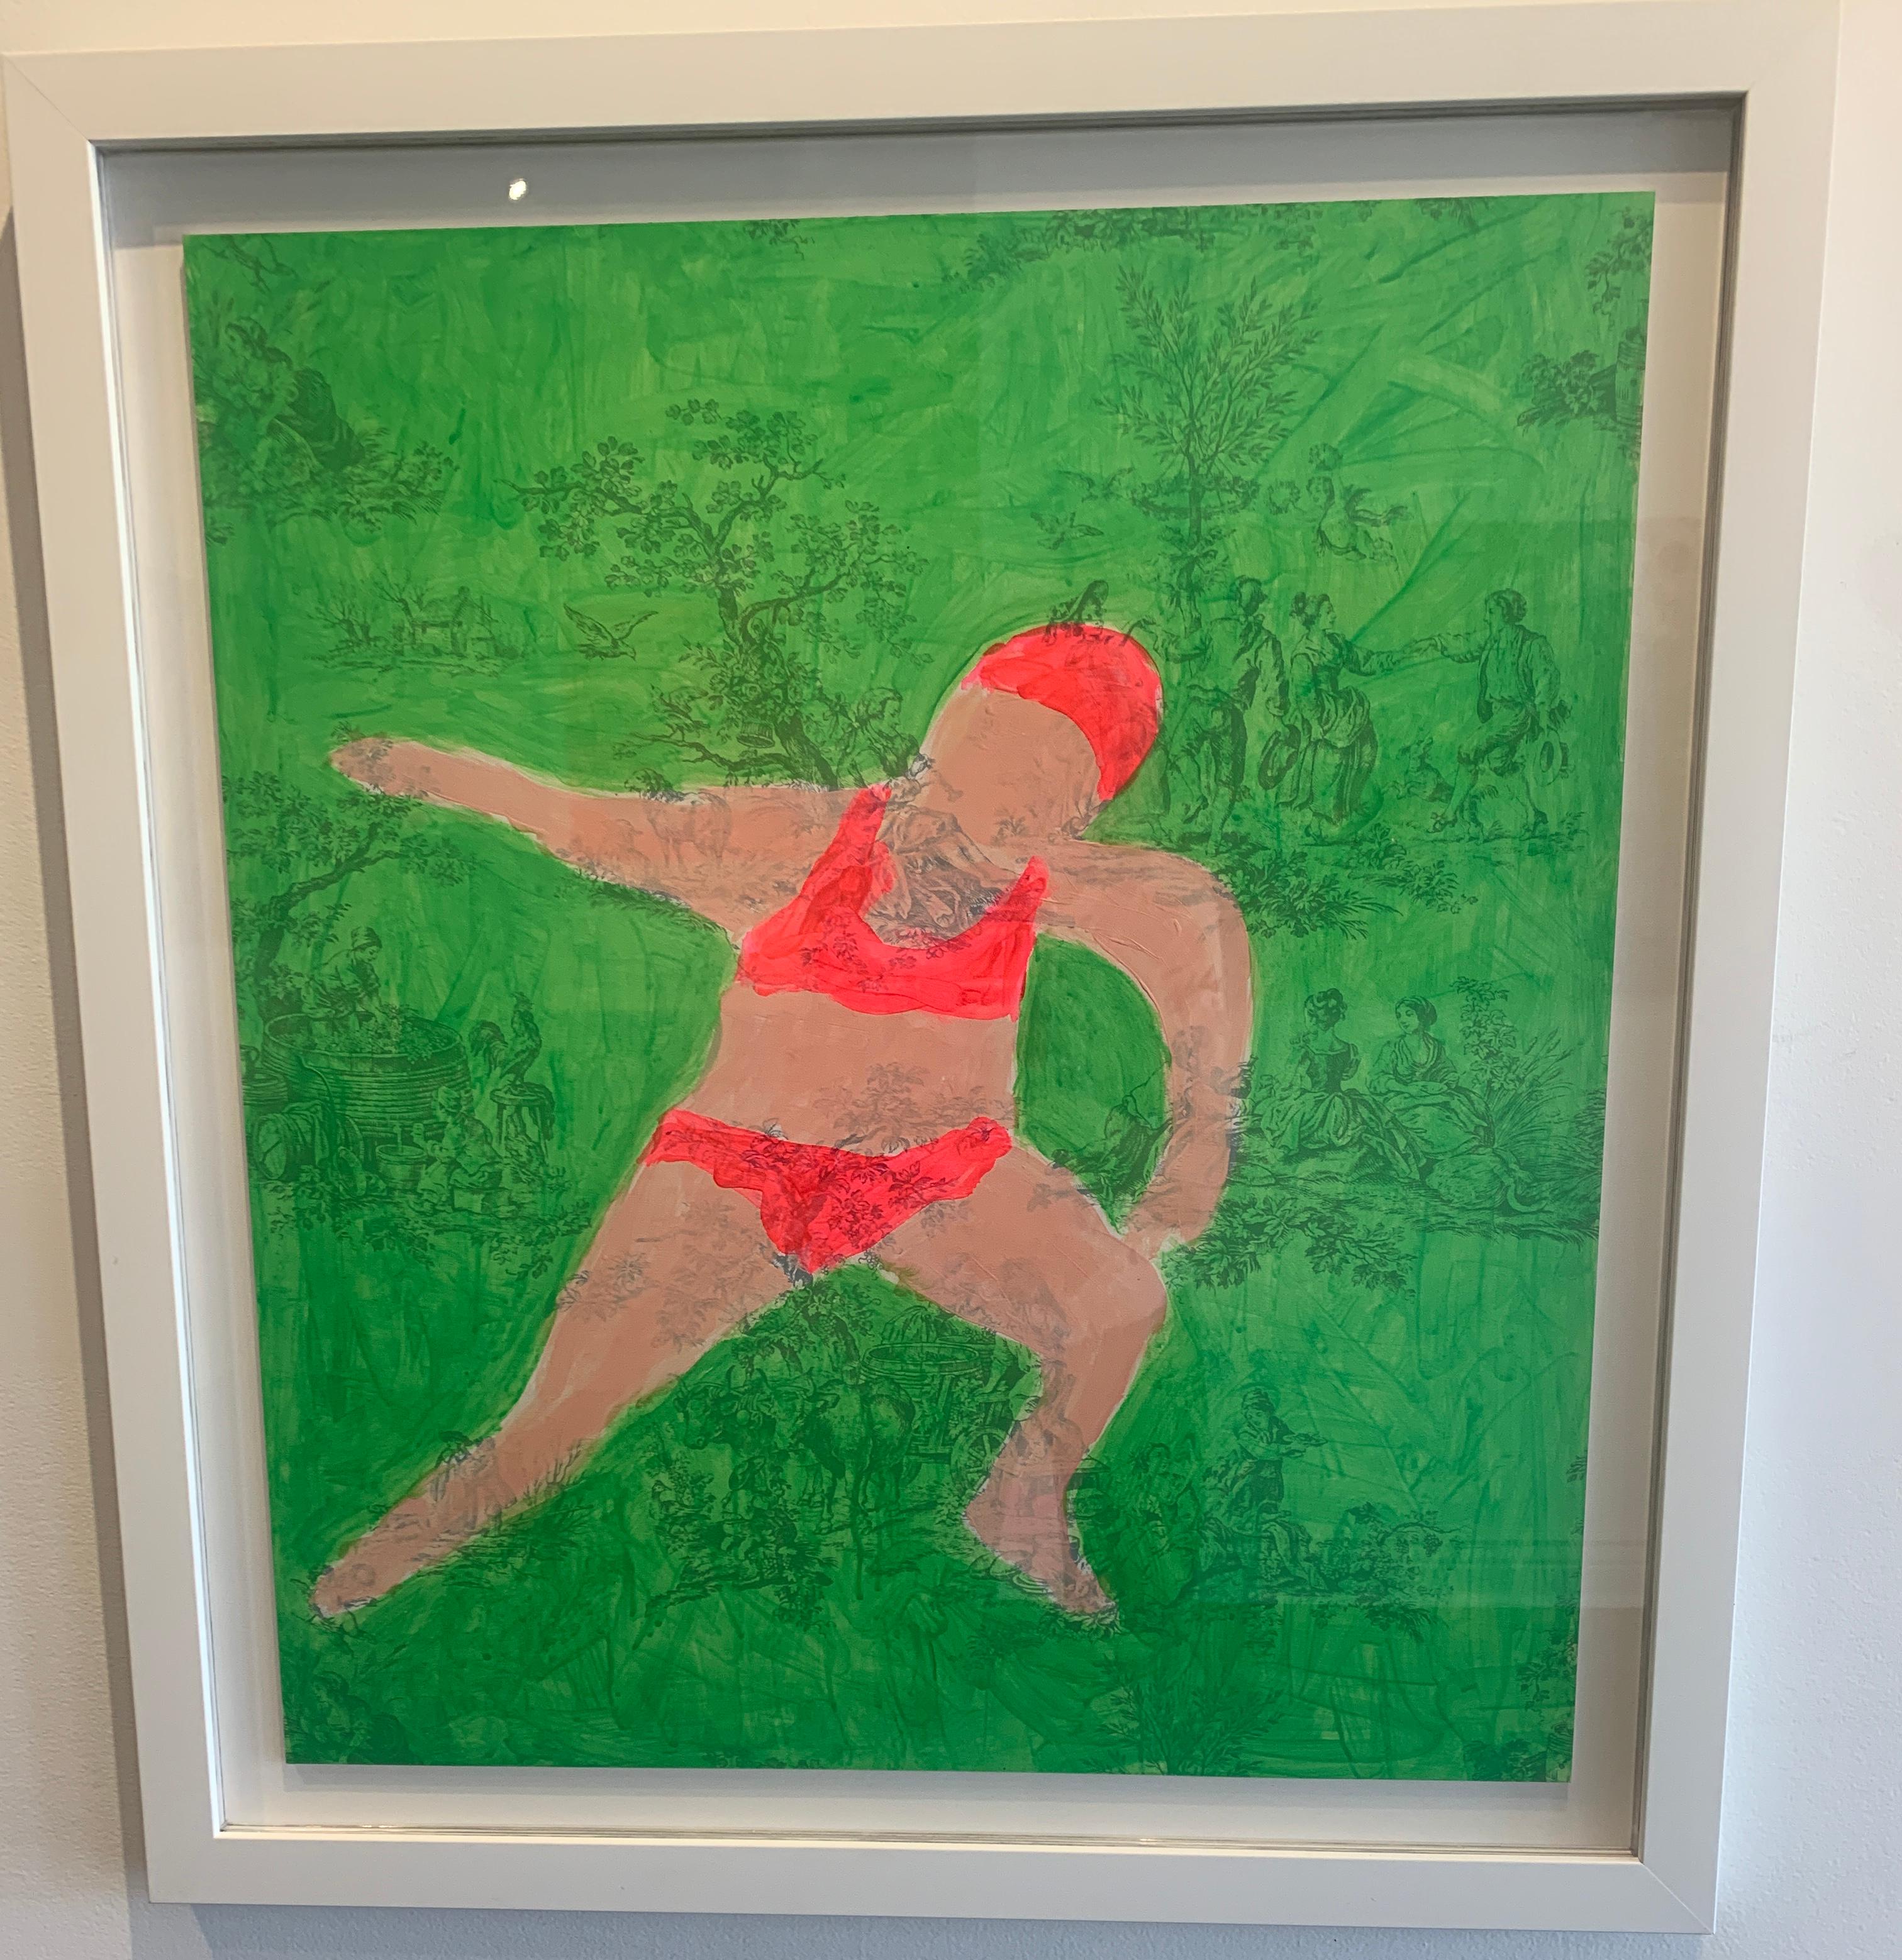 Ayse Wilson is a Turkish-American artist who lives and lives and works in Connecticut. Her work draws from memory and emotion to remind viewers of youth, innocence and the timeless space we occupy when we are young. She creates lively and childlike